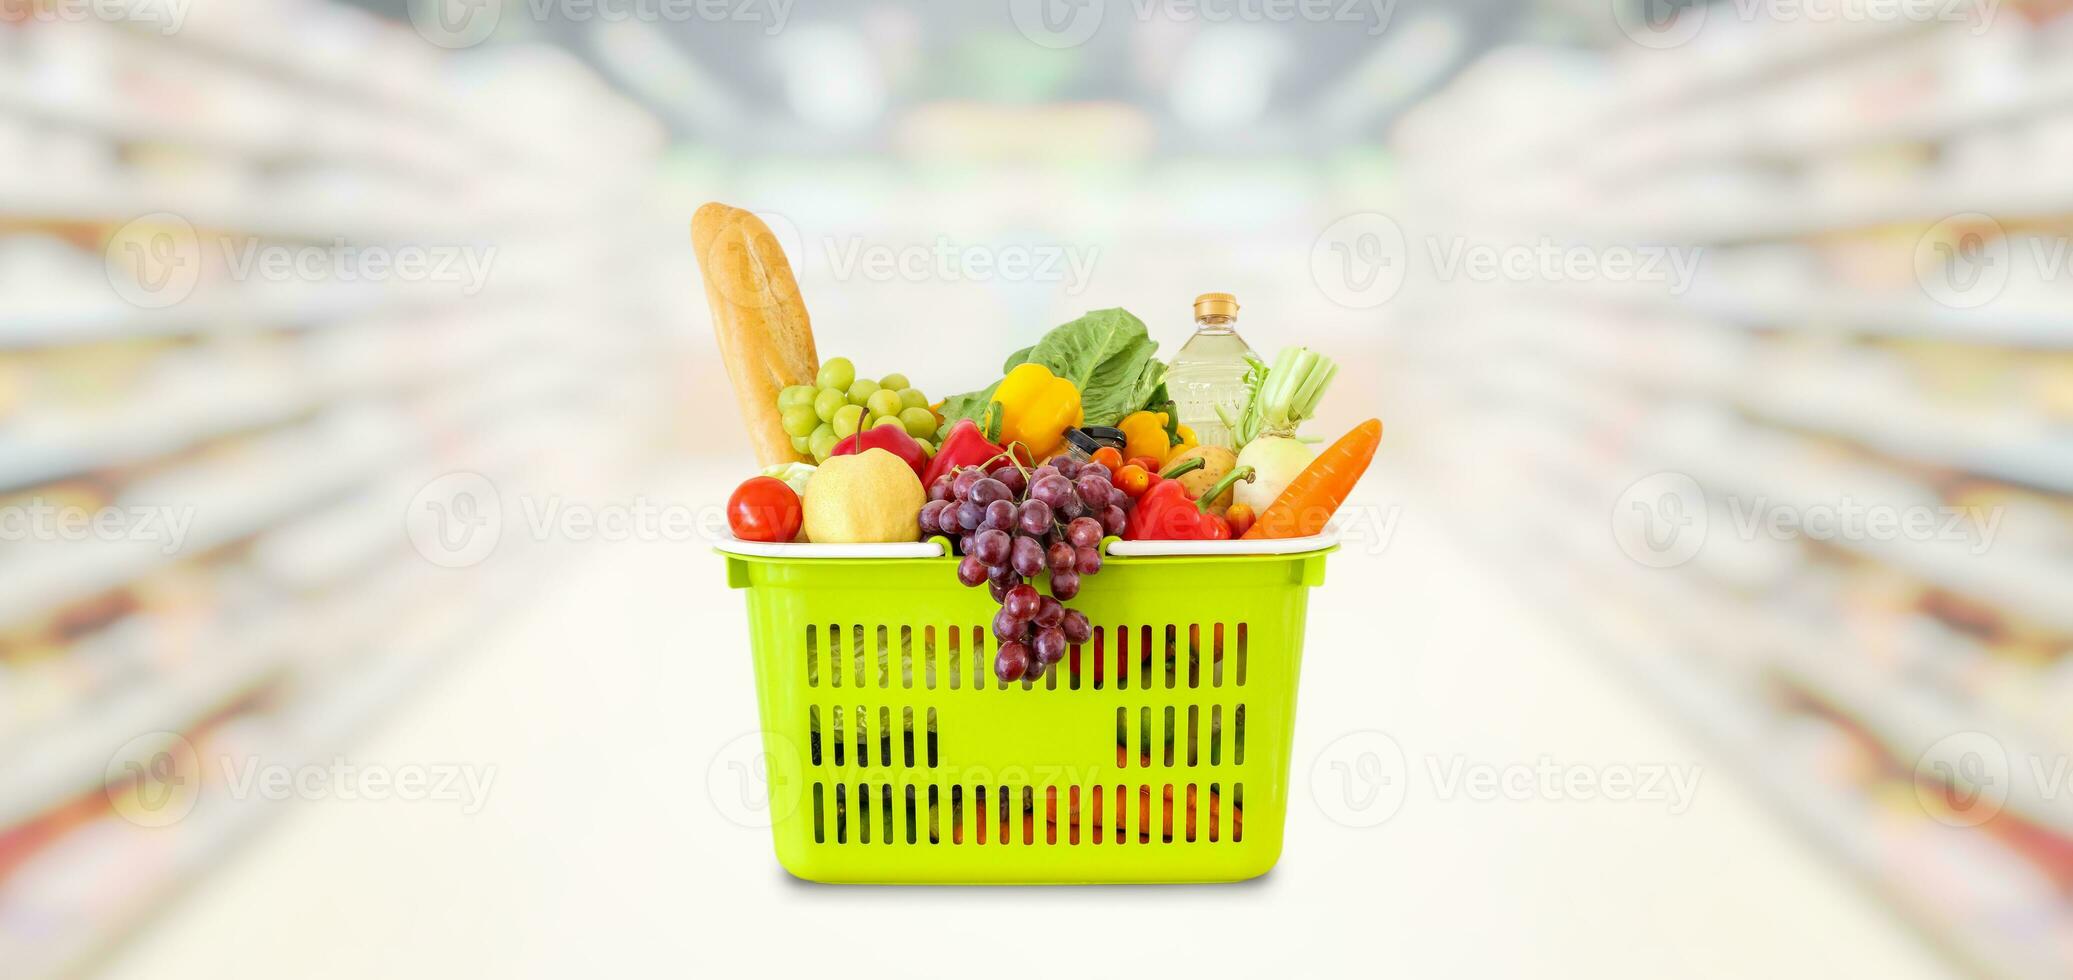 Shopping basket with fruits and vegetables in supermarket grocery store blurred background photo